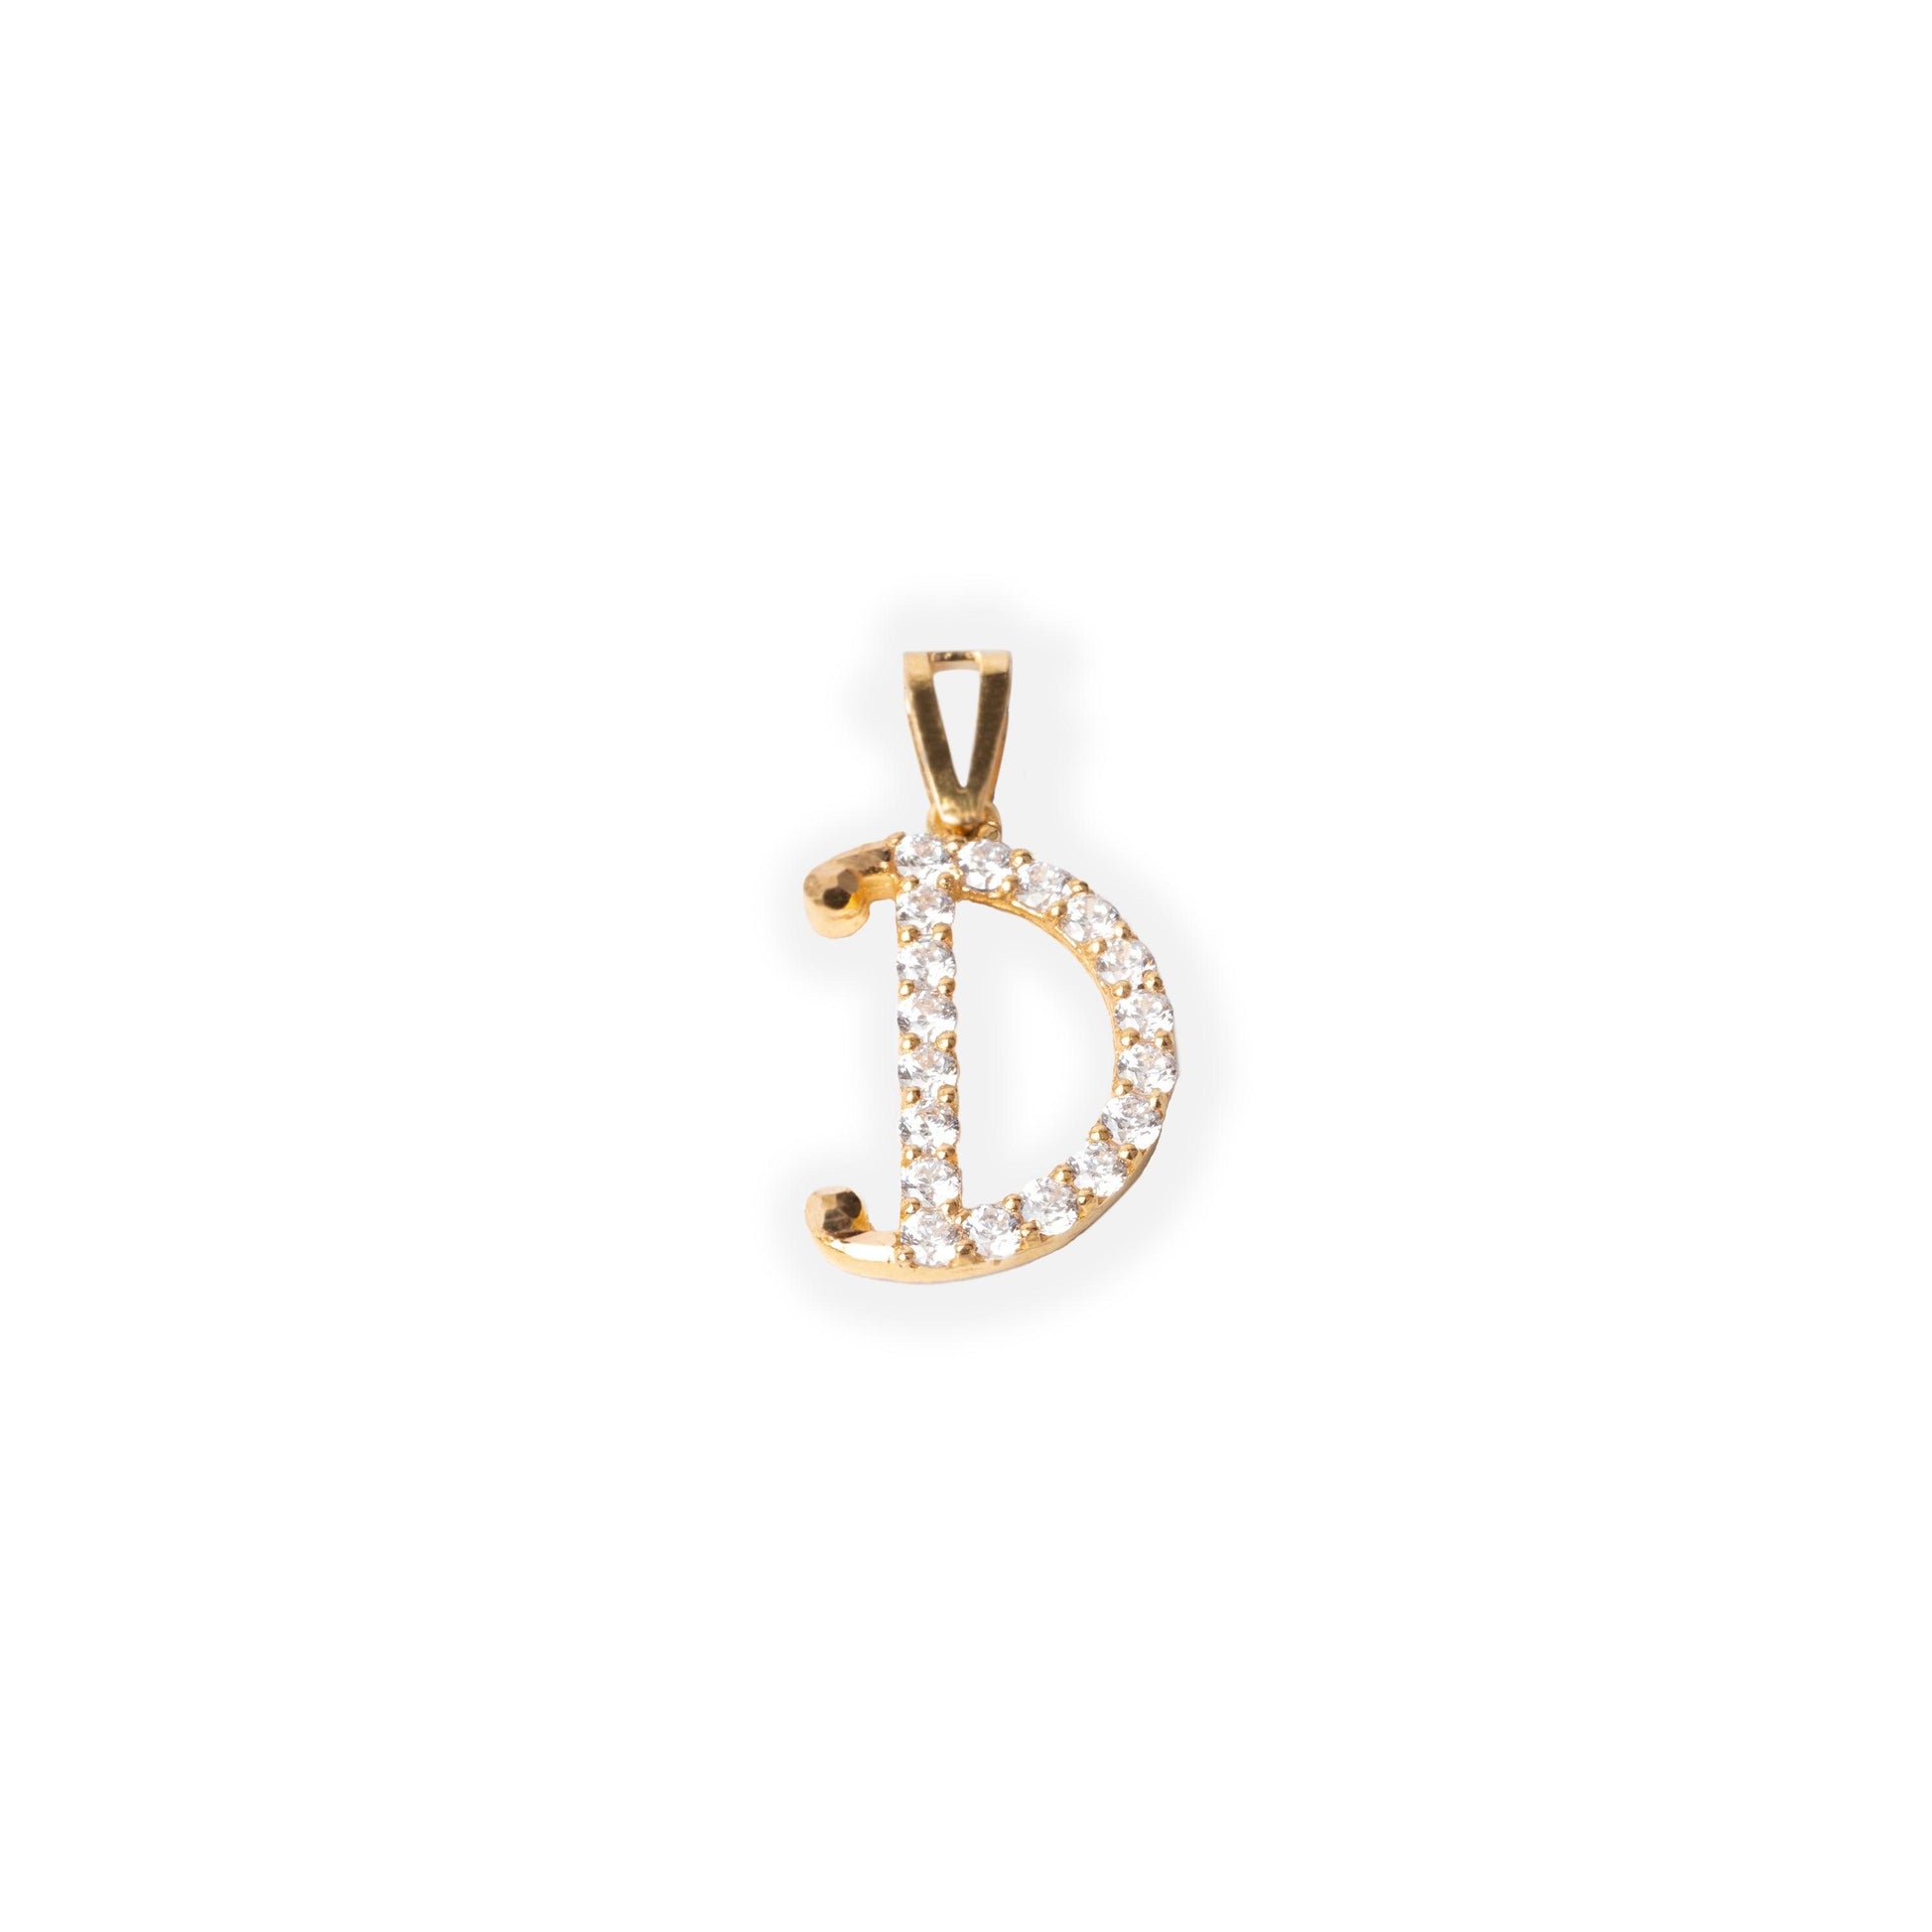 'D' 22ct Gold Initial Pendant with Cubic Zirconia Stones P-7039-D - Minar Jewellers